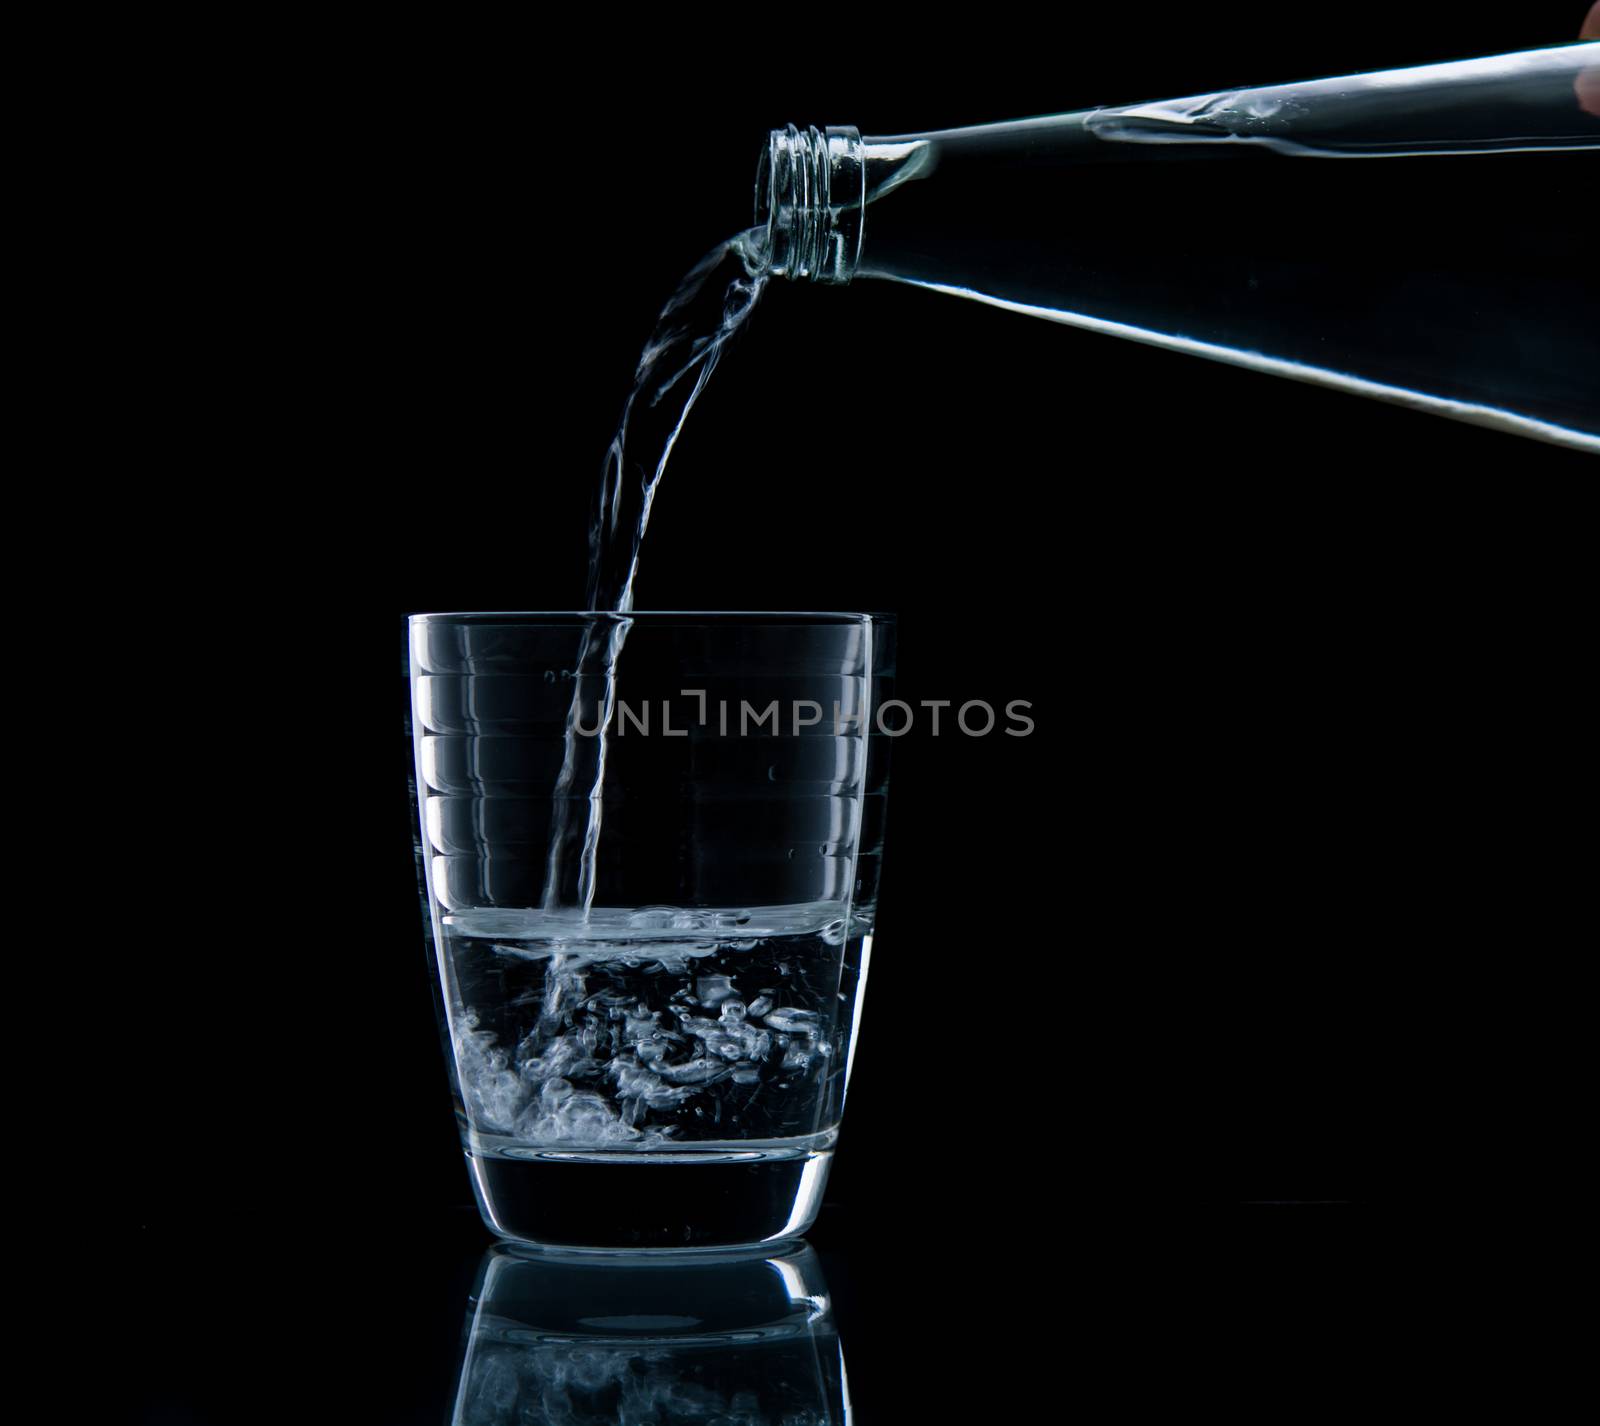 Pouring water on glass by Sorapop